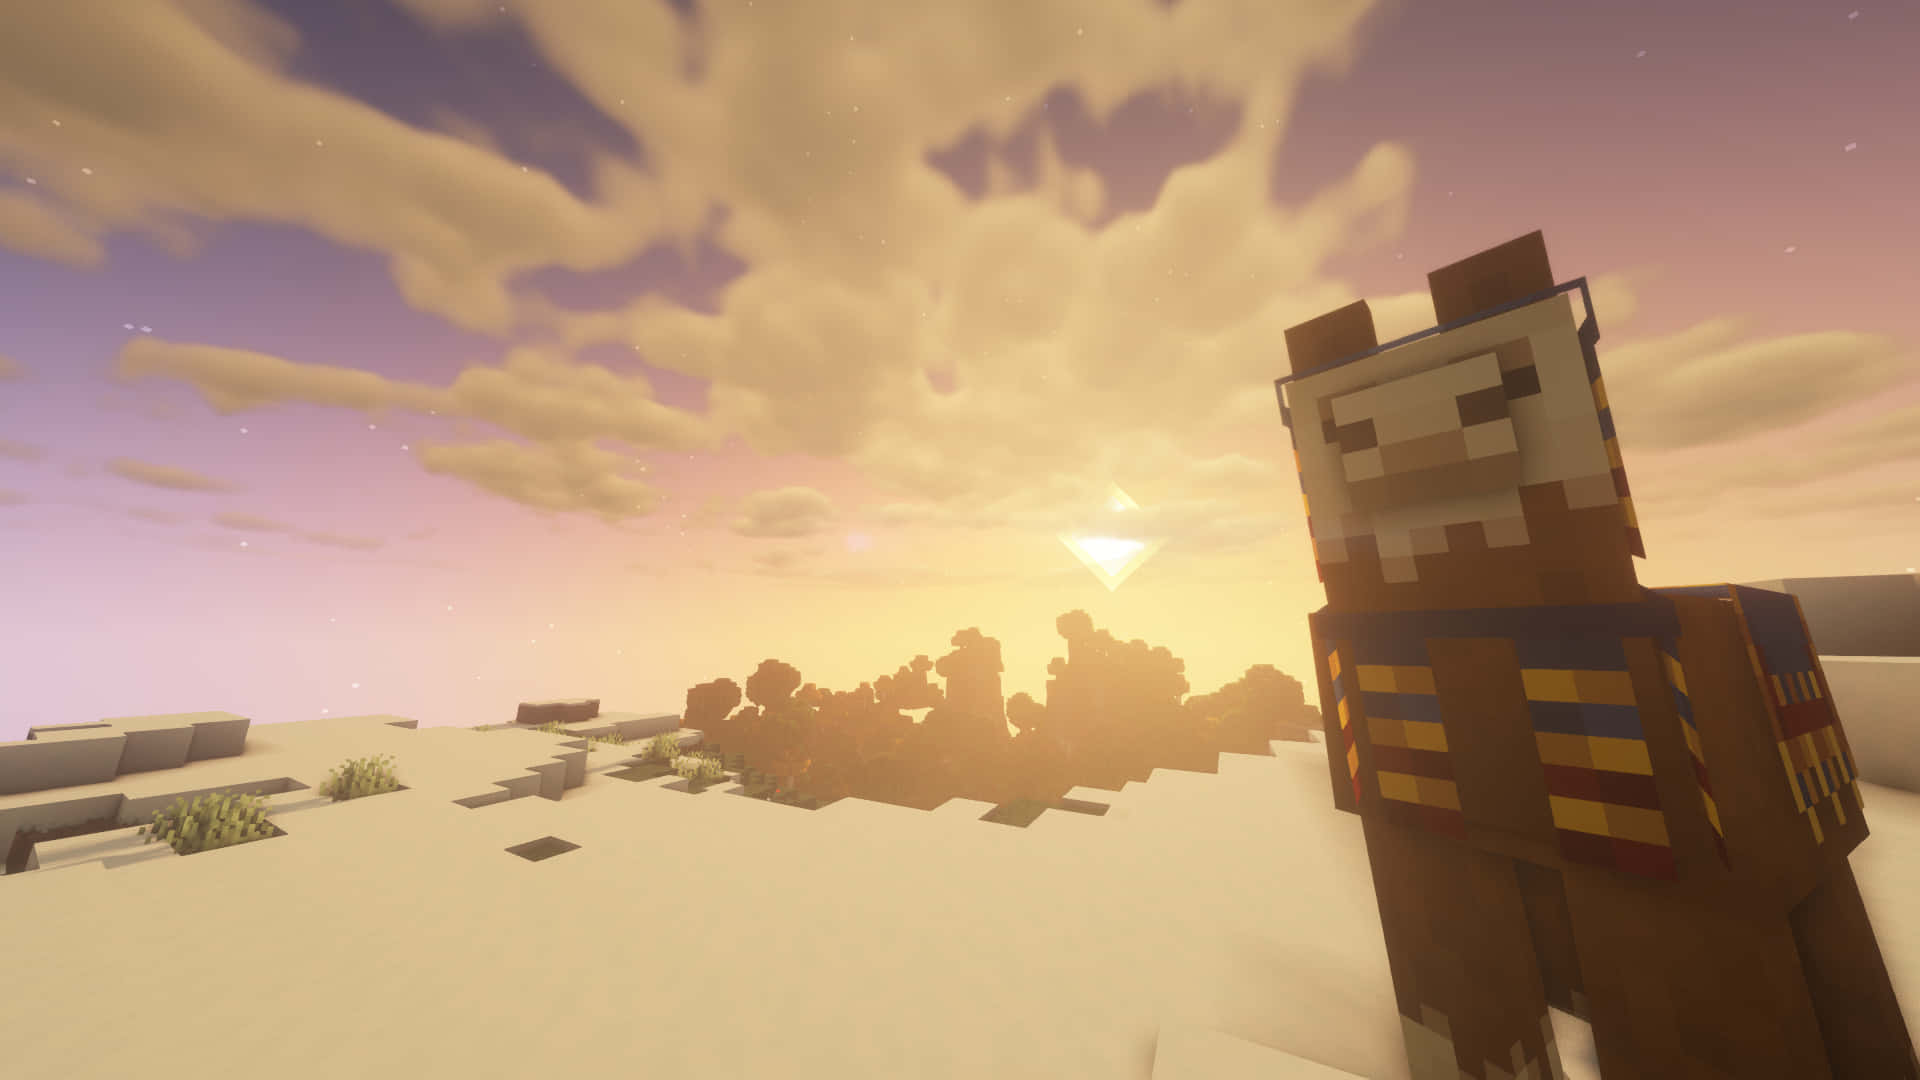 Marvel at the magnificent Minecraft Sunset. Wallpaper